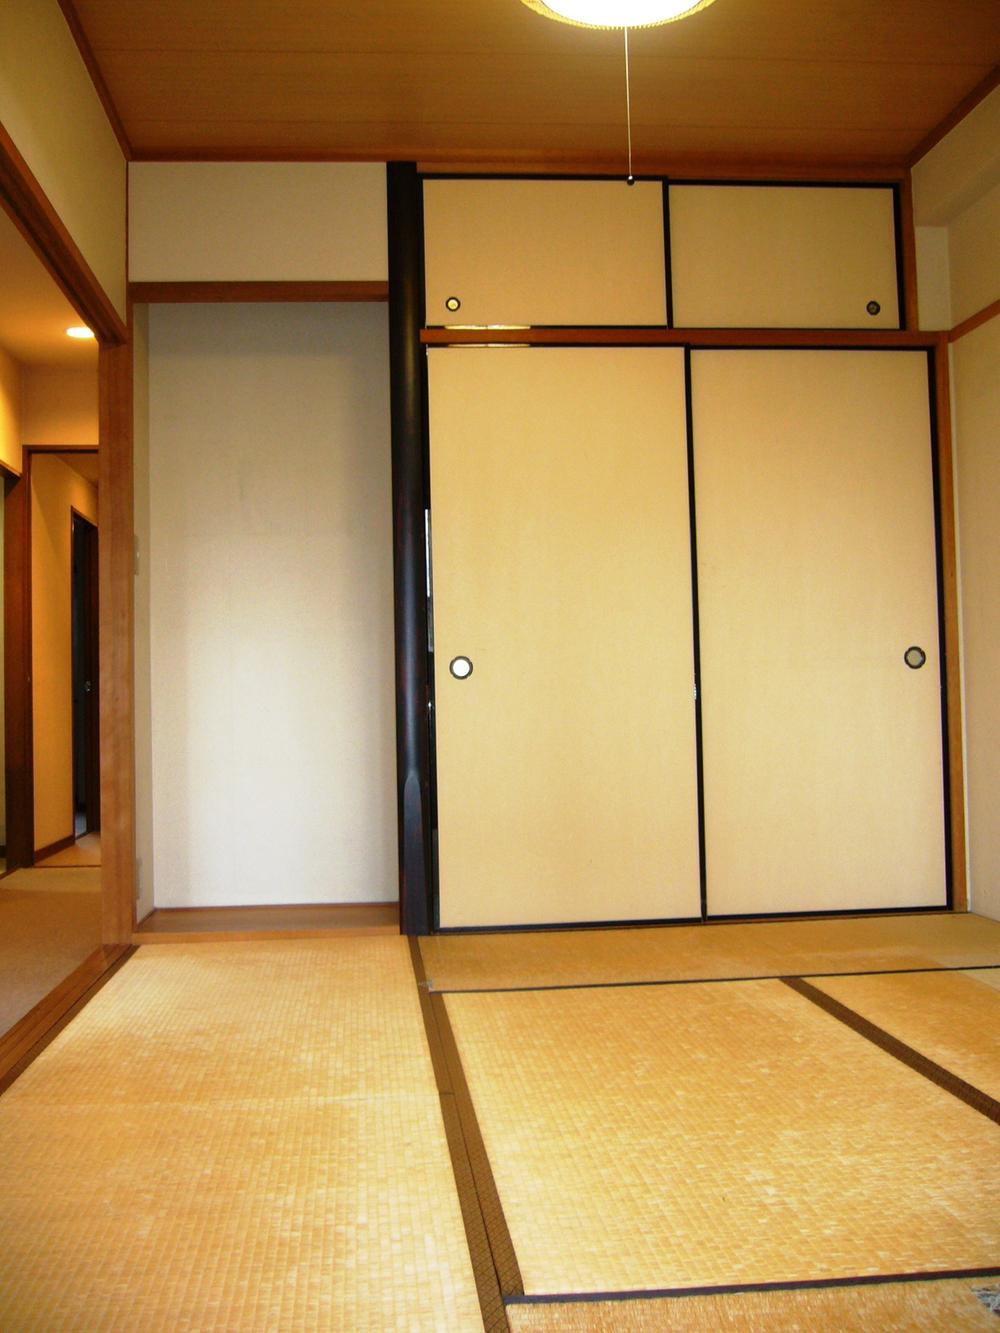 Other introspection. Japanese-style room (July 2013 shooting)